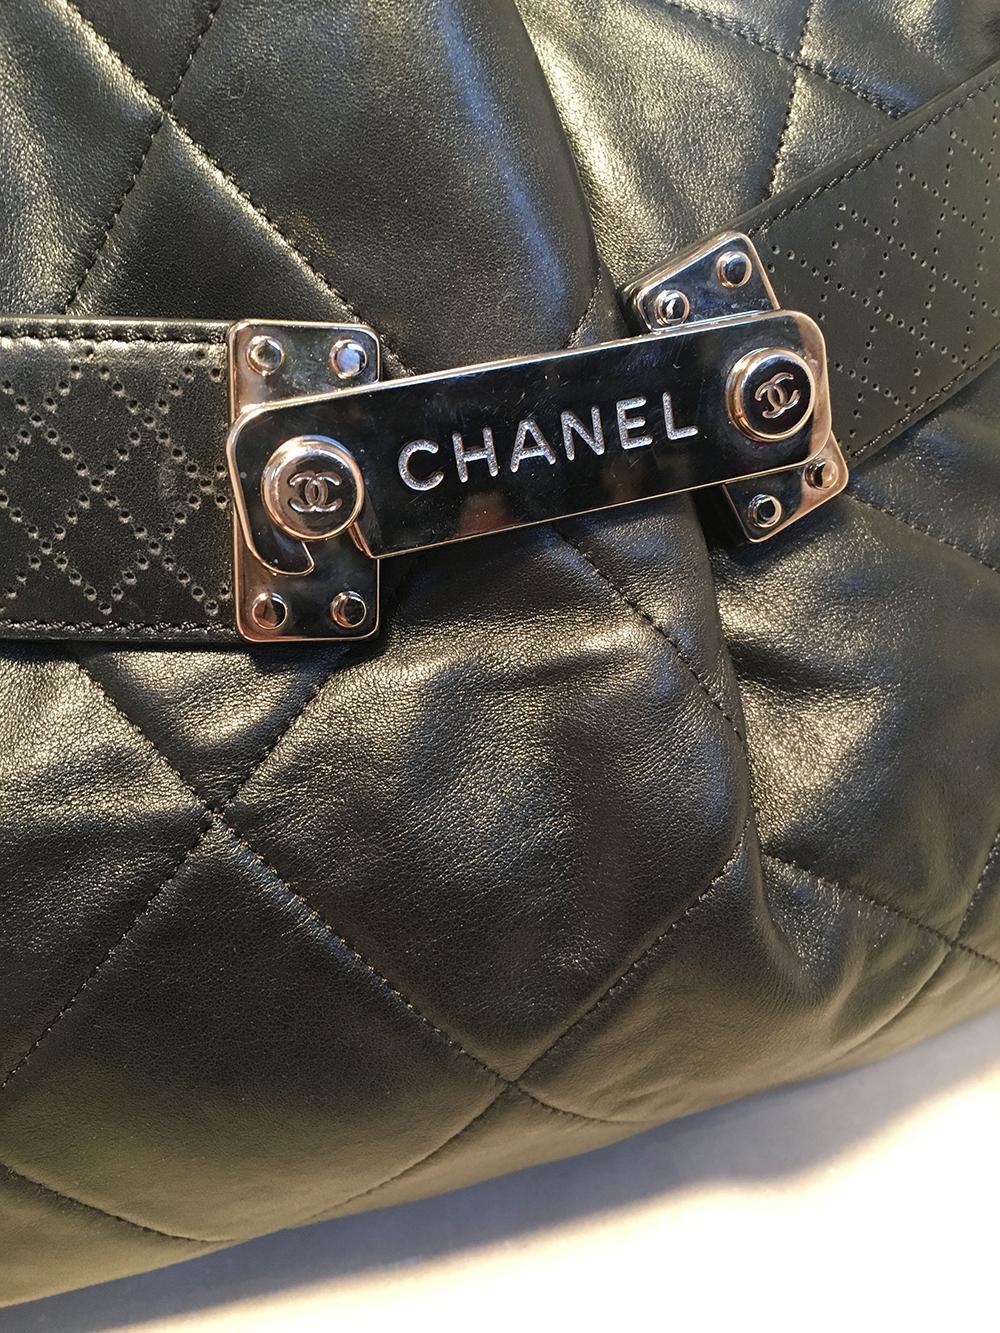 Chanel Quilted Black Leather Latch Front Tote Bag In Excellent Condition For Sale In Philadelphia, PA